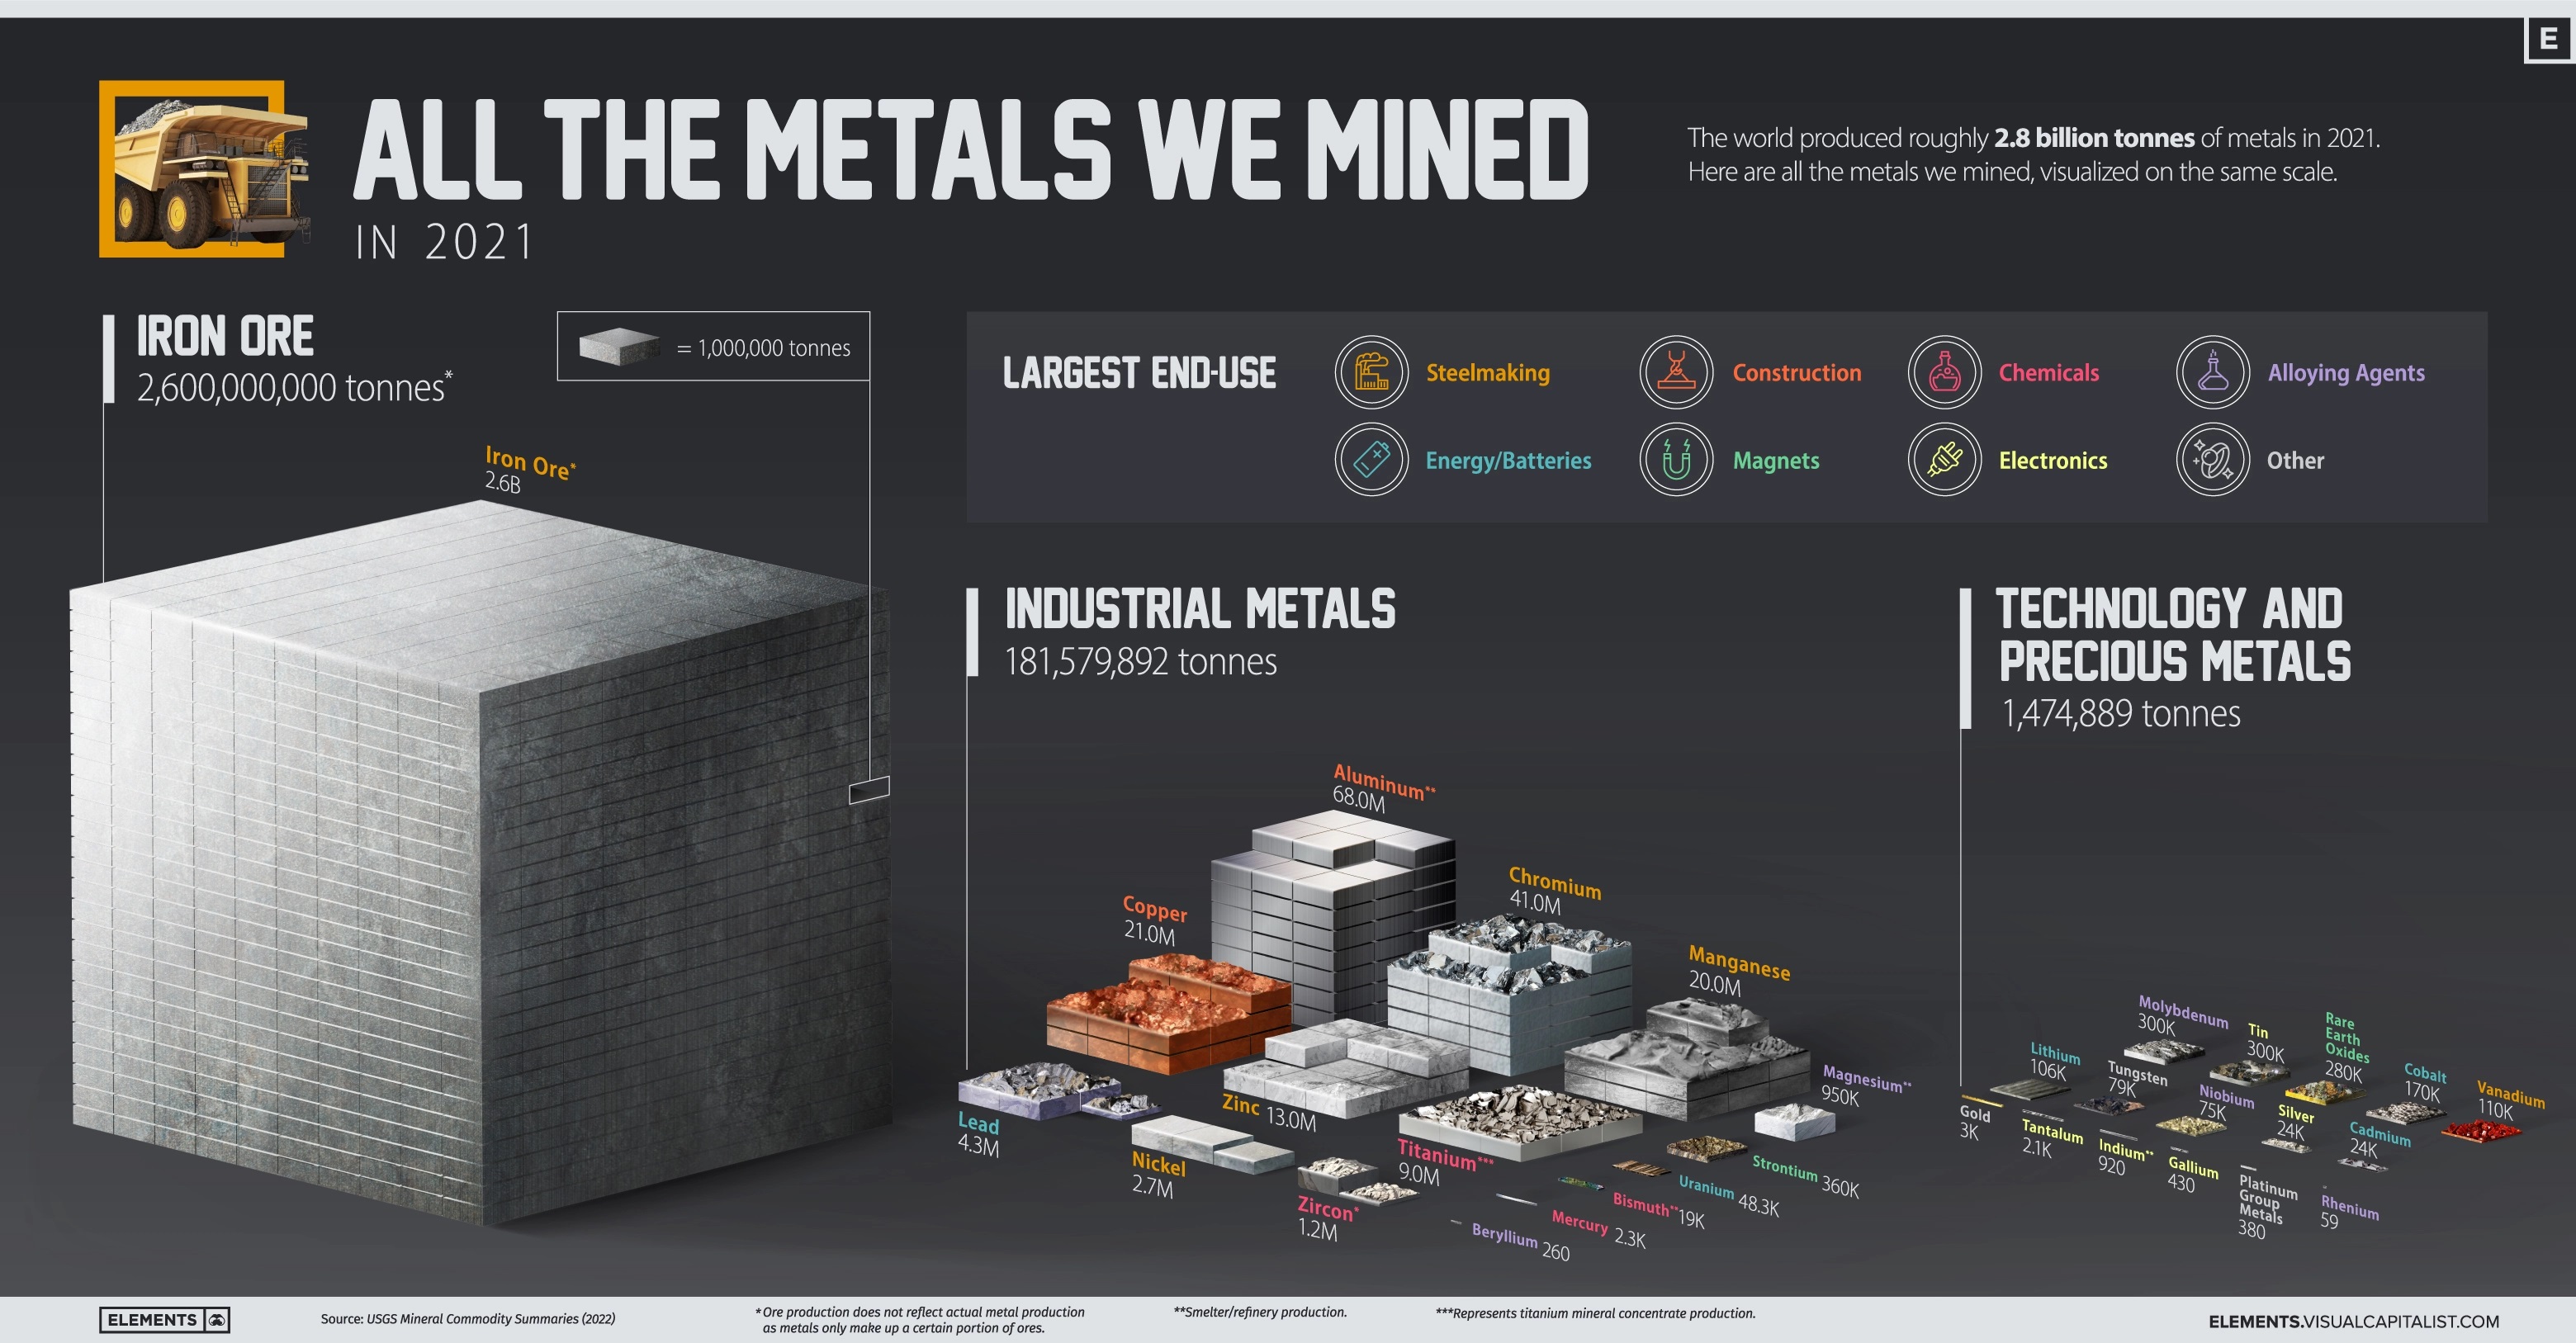 all-the-metals-we-mined-infographic-2021-updated.jpg